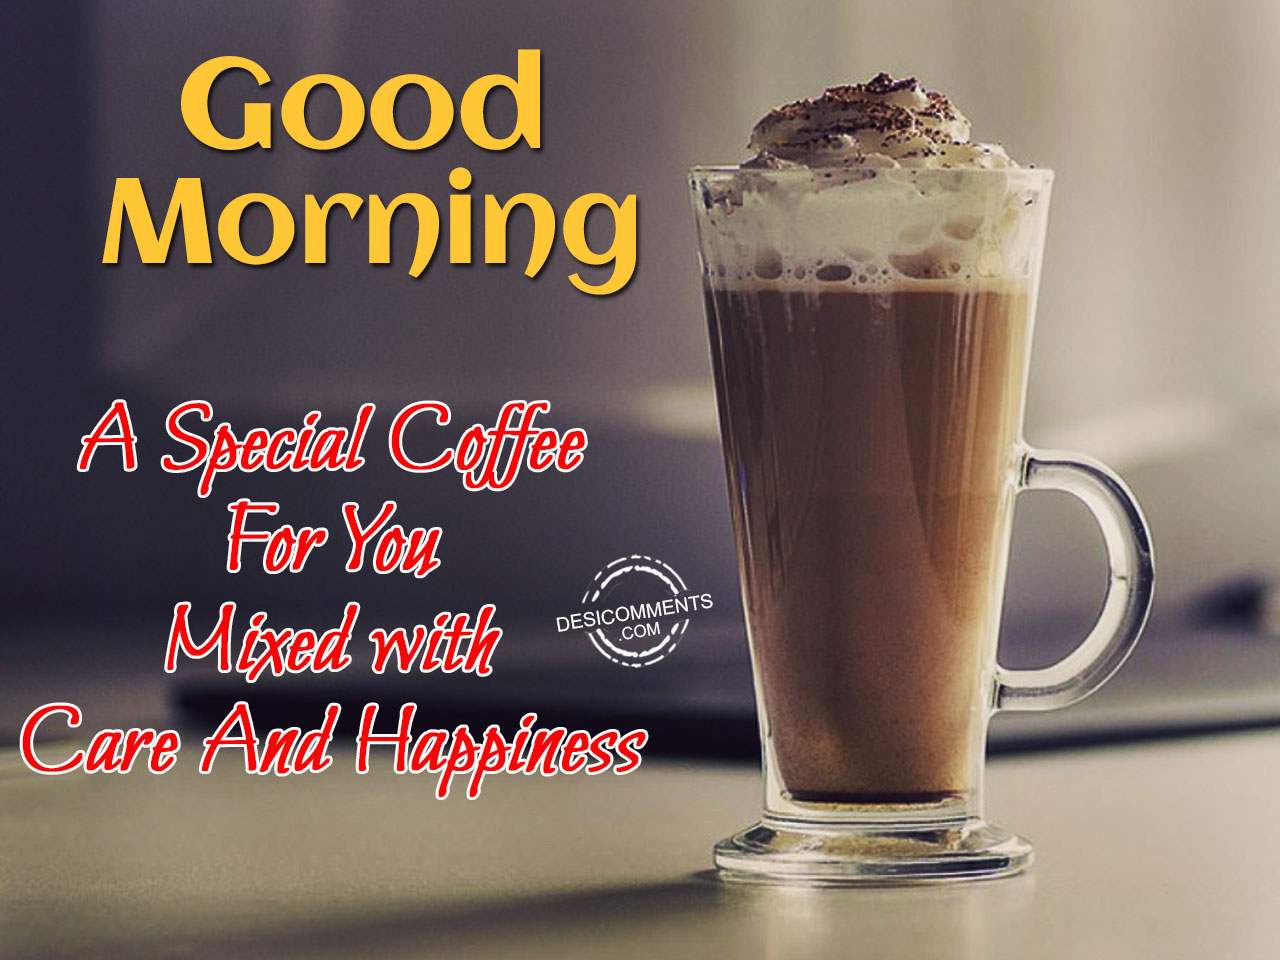 Good Morning - A Special Coffee For You - DesiComments.com